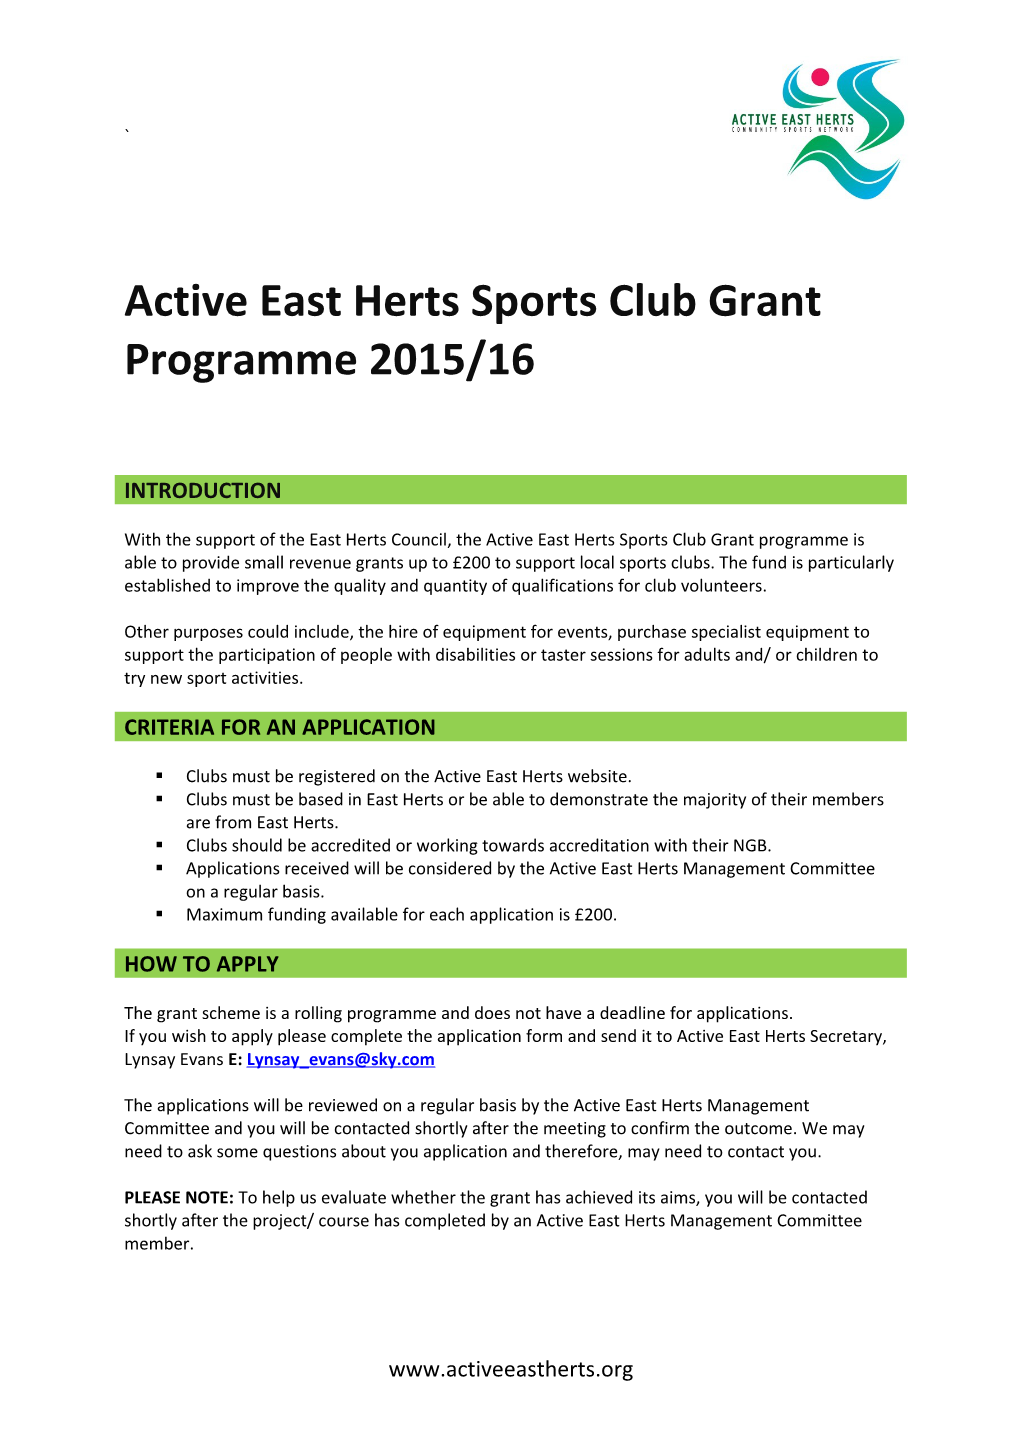 Clubs Must Be Registered on the Active East Herts Website